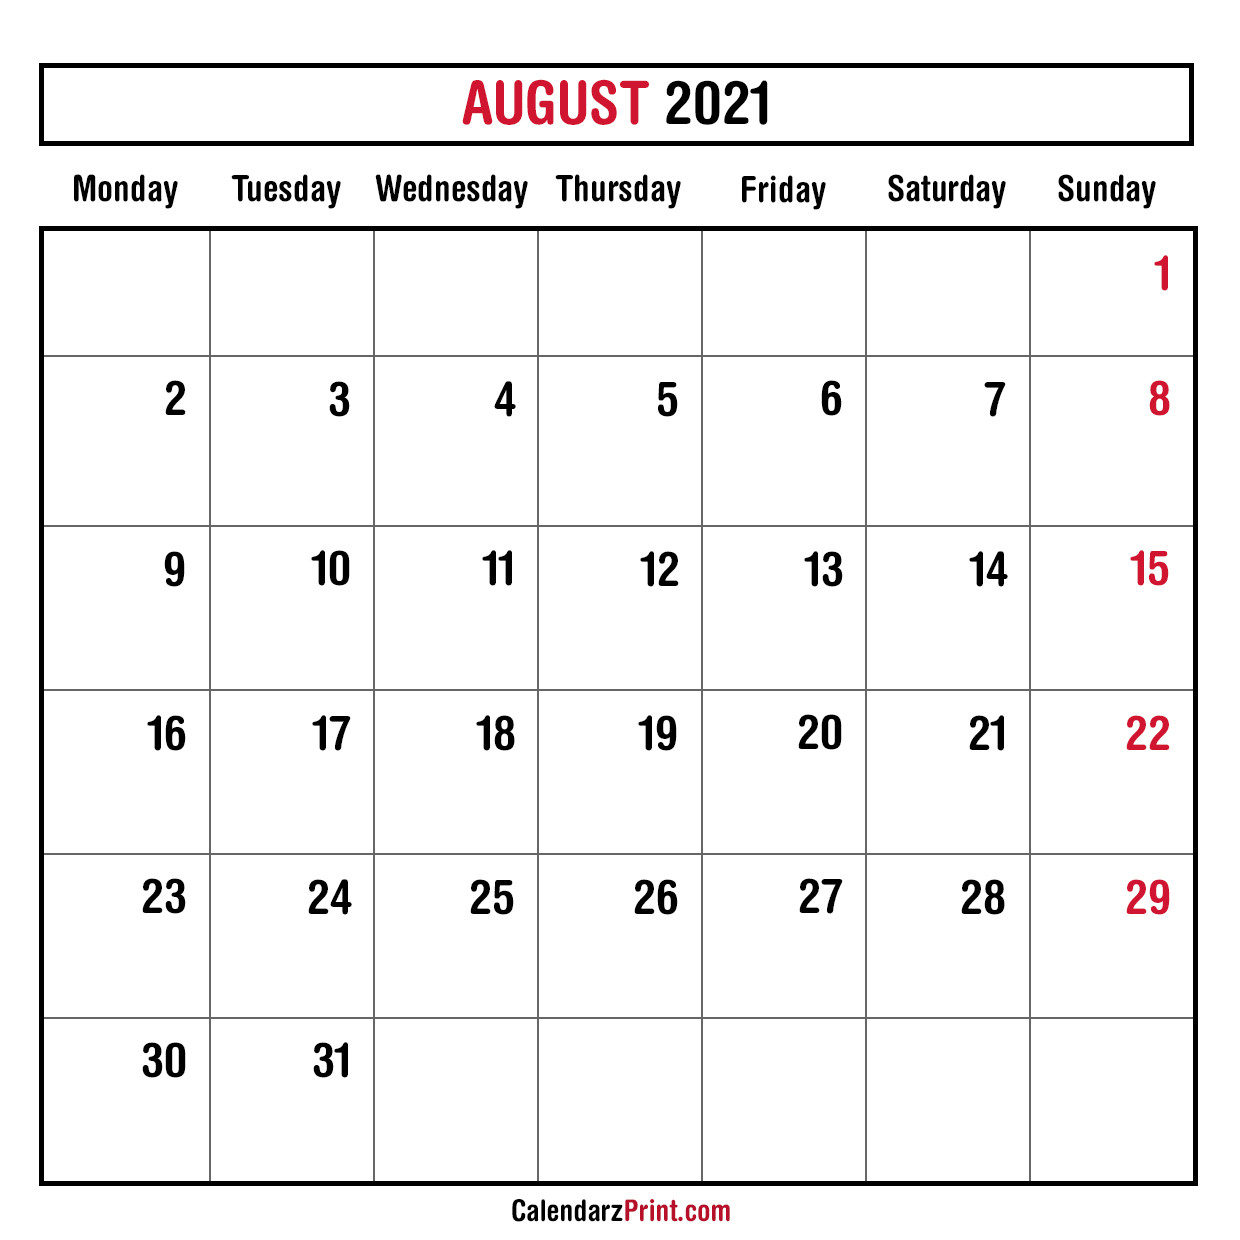 August 2021 Monthly Planner Calendar, Printable Free-Monday To Friday August 2021 Calendar